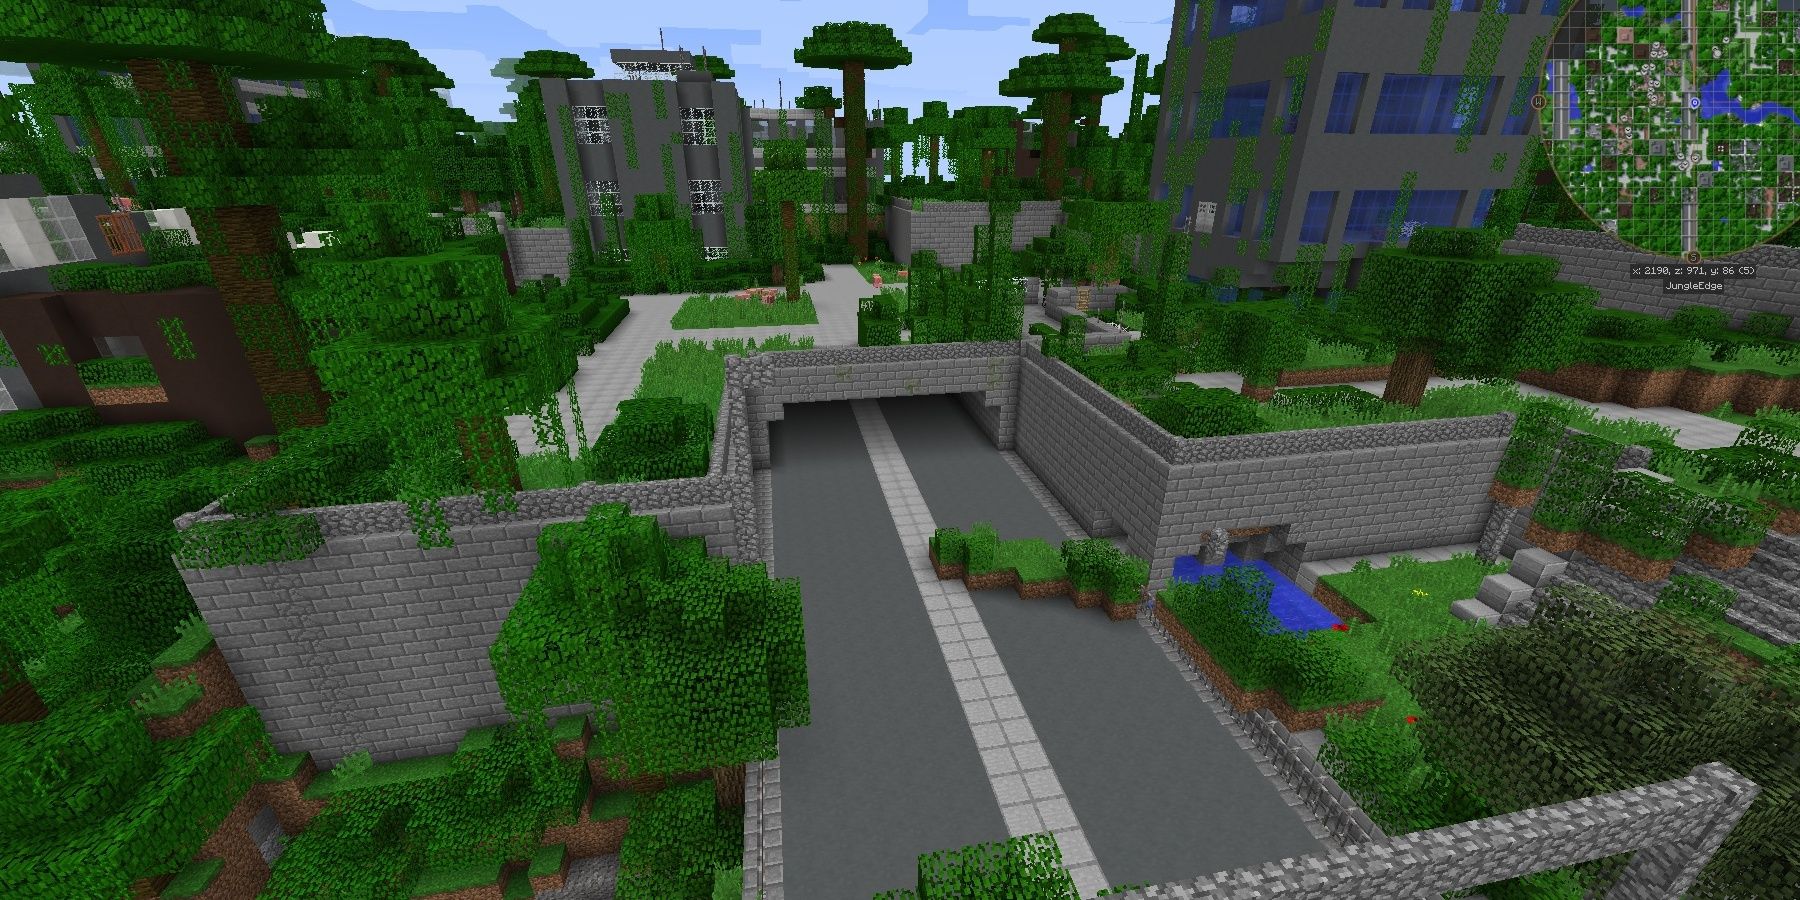 Minecraft Lost Cities Dimension Mod Jungle Biome Overgrown Road Buildings